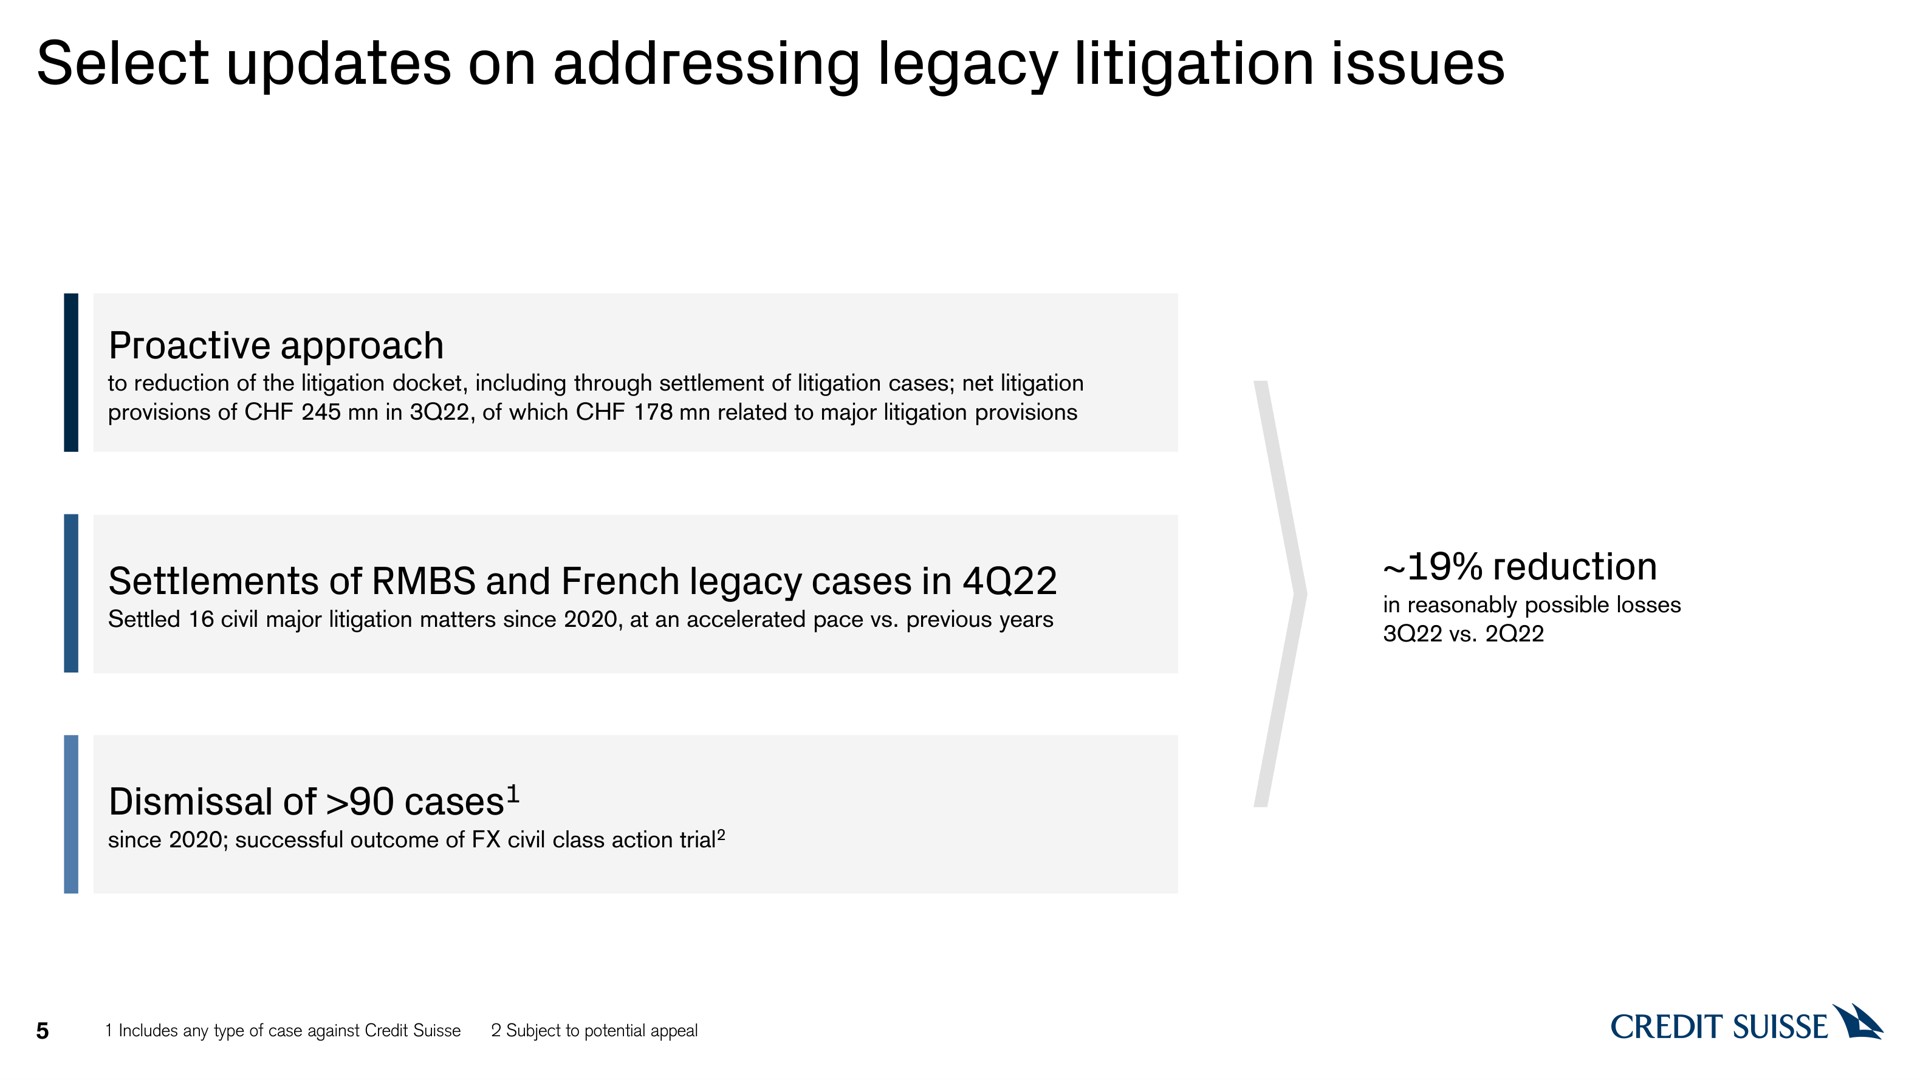 select updates on addressing legacy litigation issues approach settlements of and legacy cases in reduction dismissal of cases | Credit Suisse